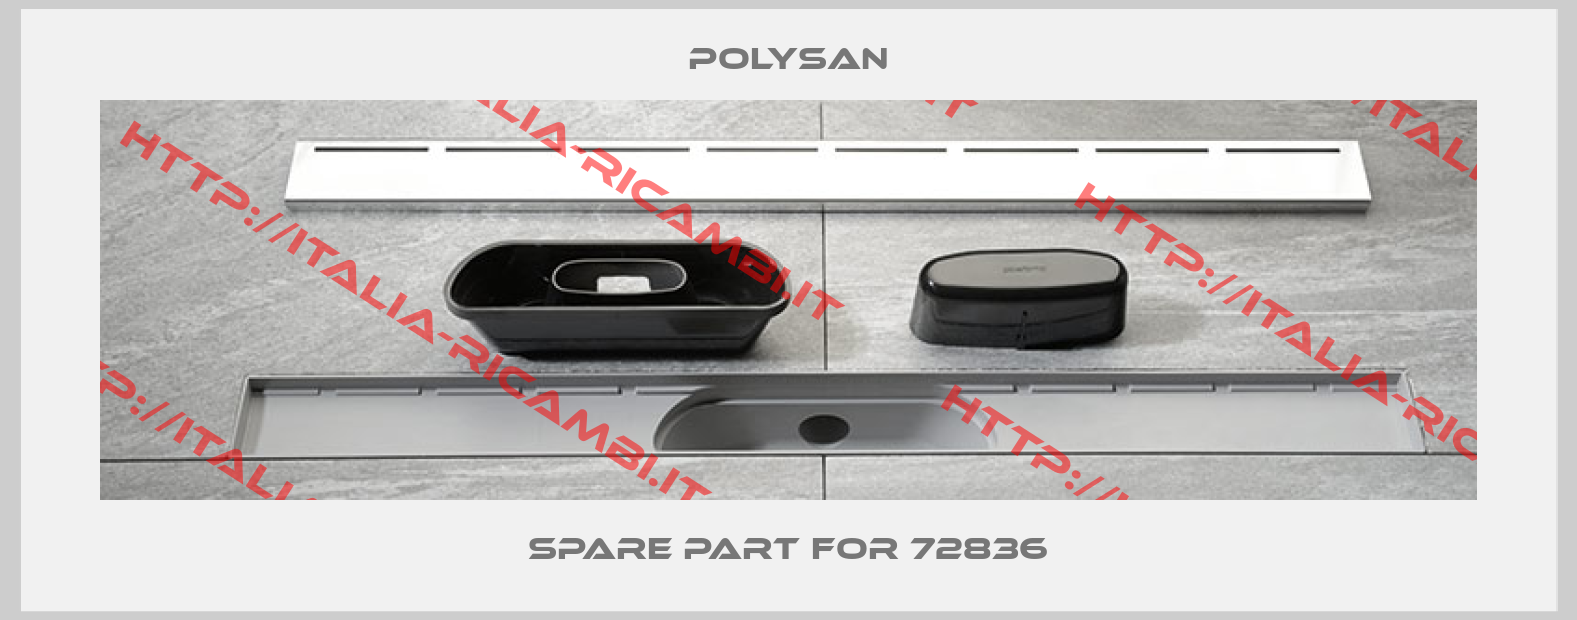 polysan-Spare part for 72836